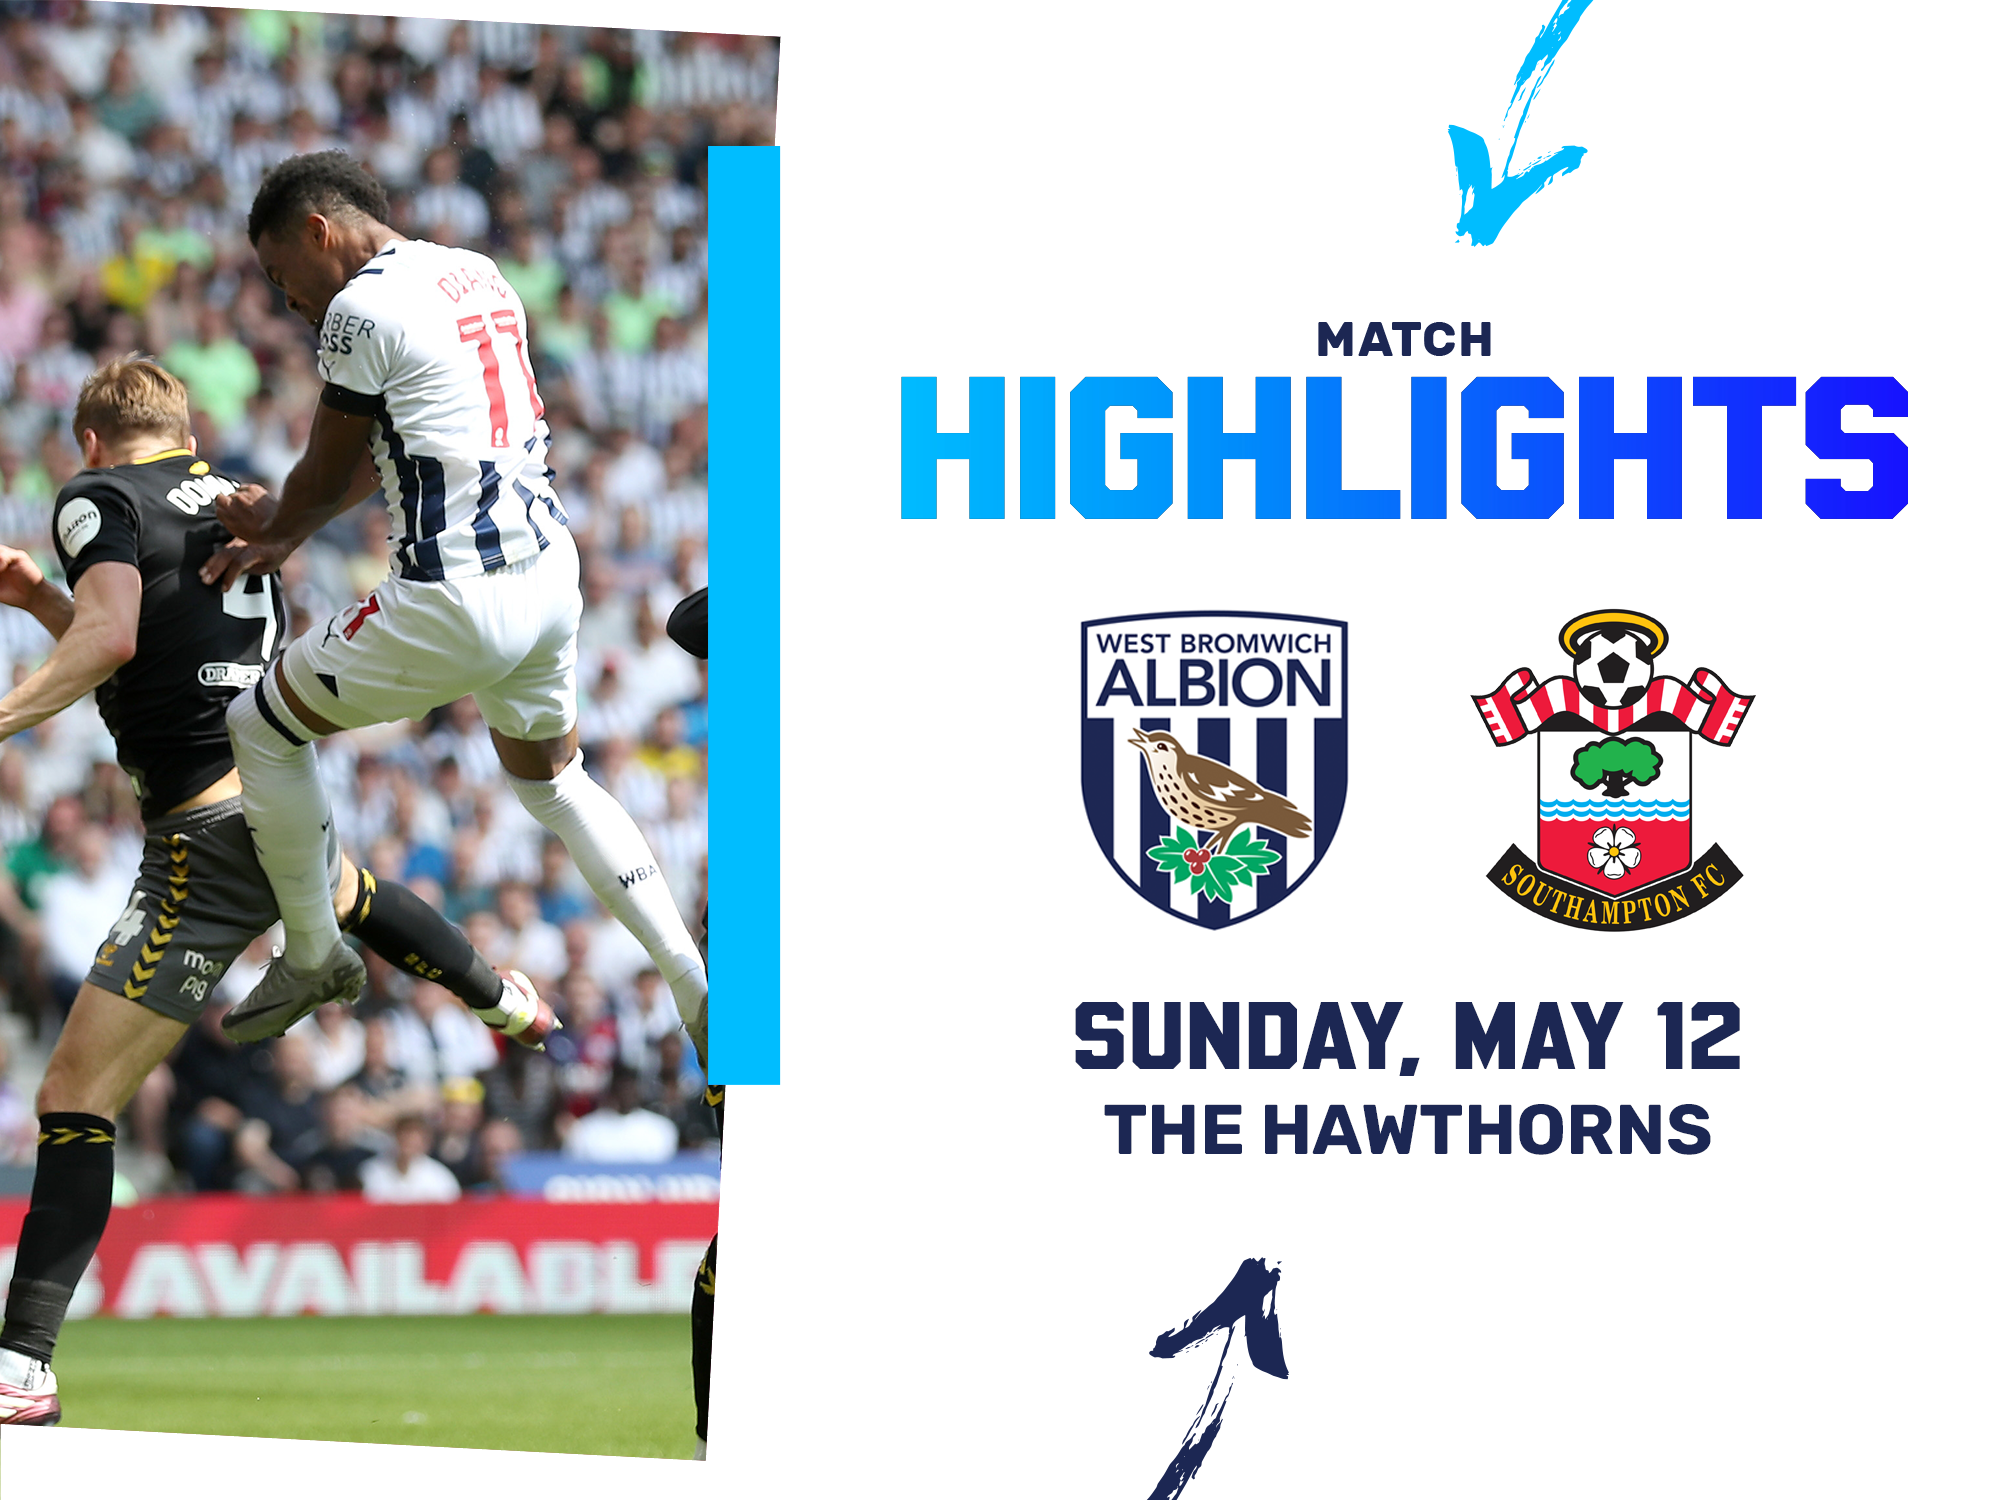 A match highlights photo graphic, showing the club crests of Albion and Southampton, along with a picture of Grady Diangana in the 23/24 home kit jumping to head a cross